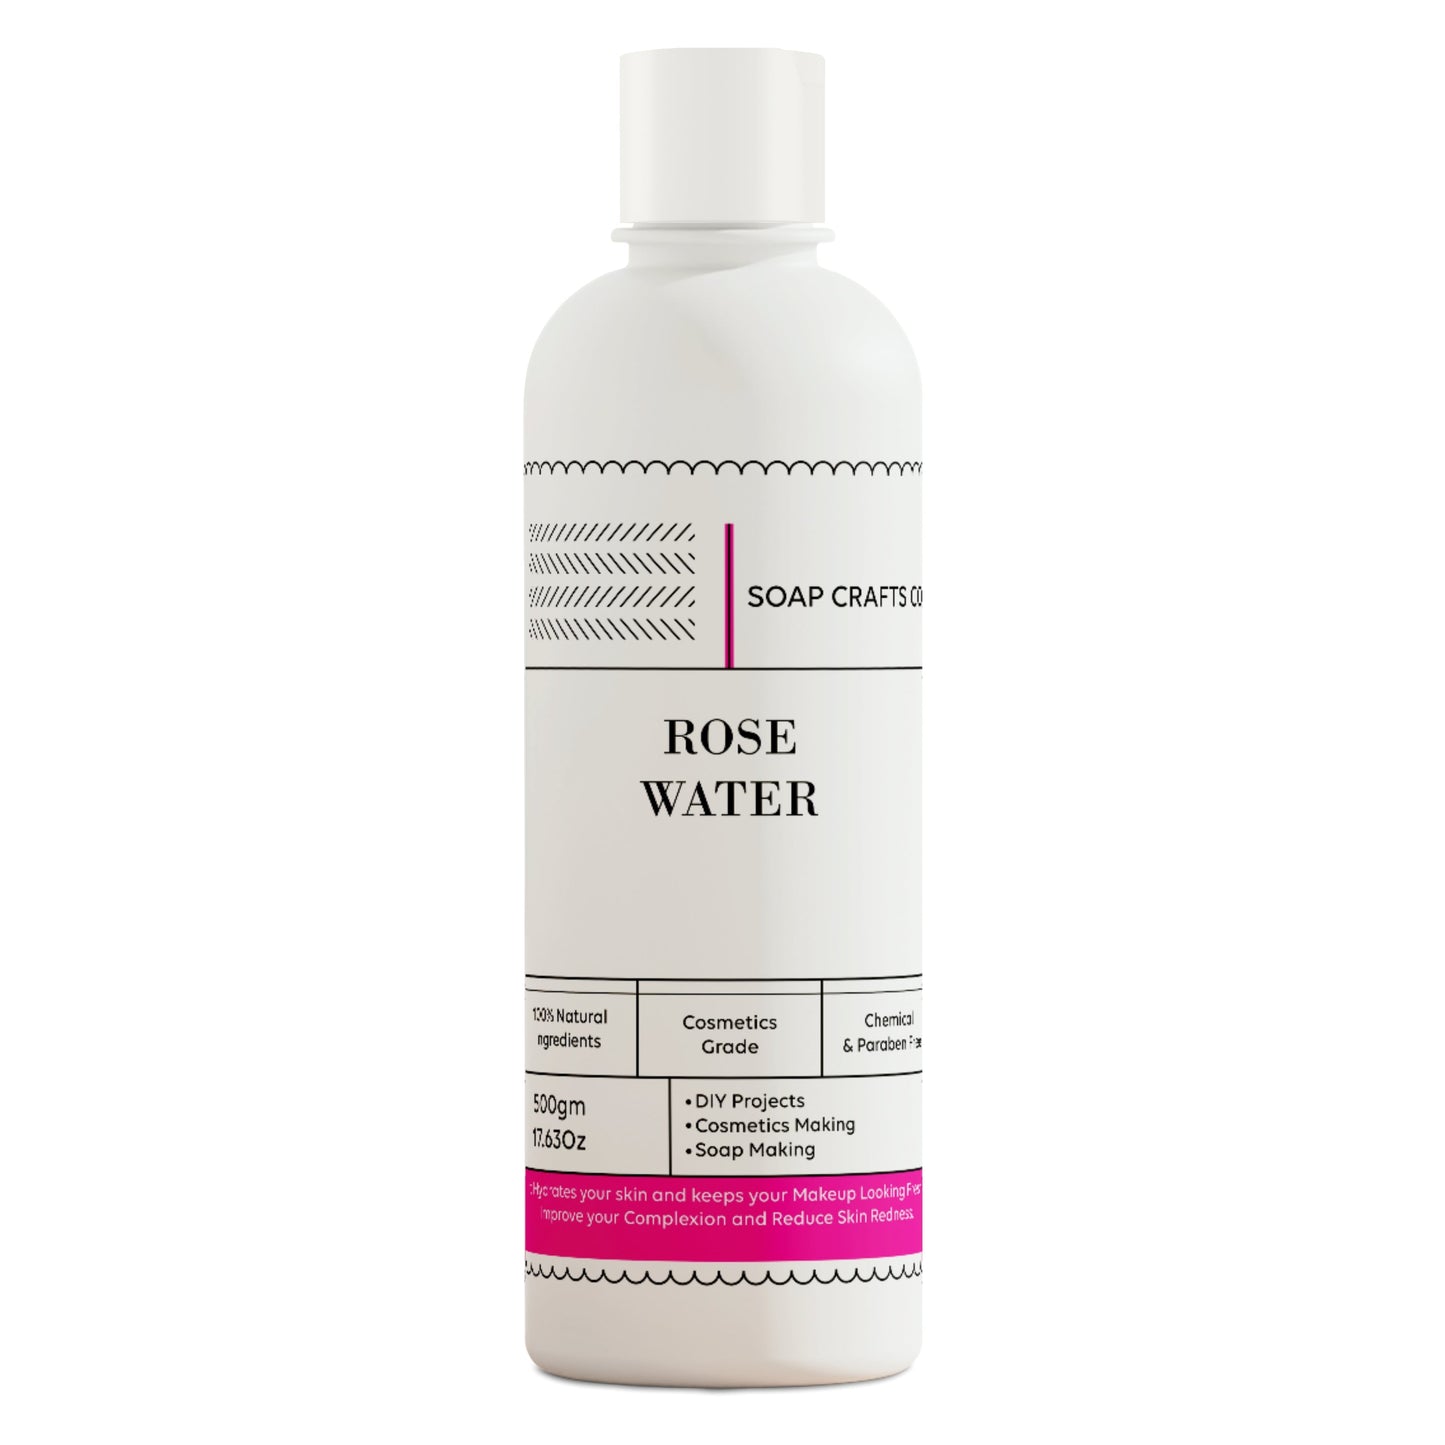 Rose water, rose water for skin, tonner, cleanser, organic rose water, chemical free rose water, rose water for face, best rose water, makeup cleaner, hydrating, rose water for skin, face cleanser, cosmetic making, ingredients, cosmetic making ingredients